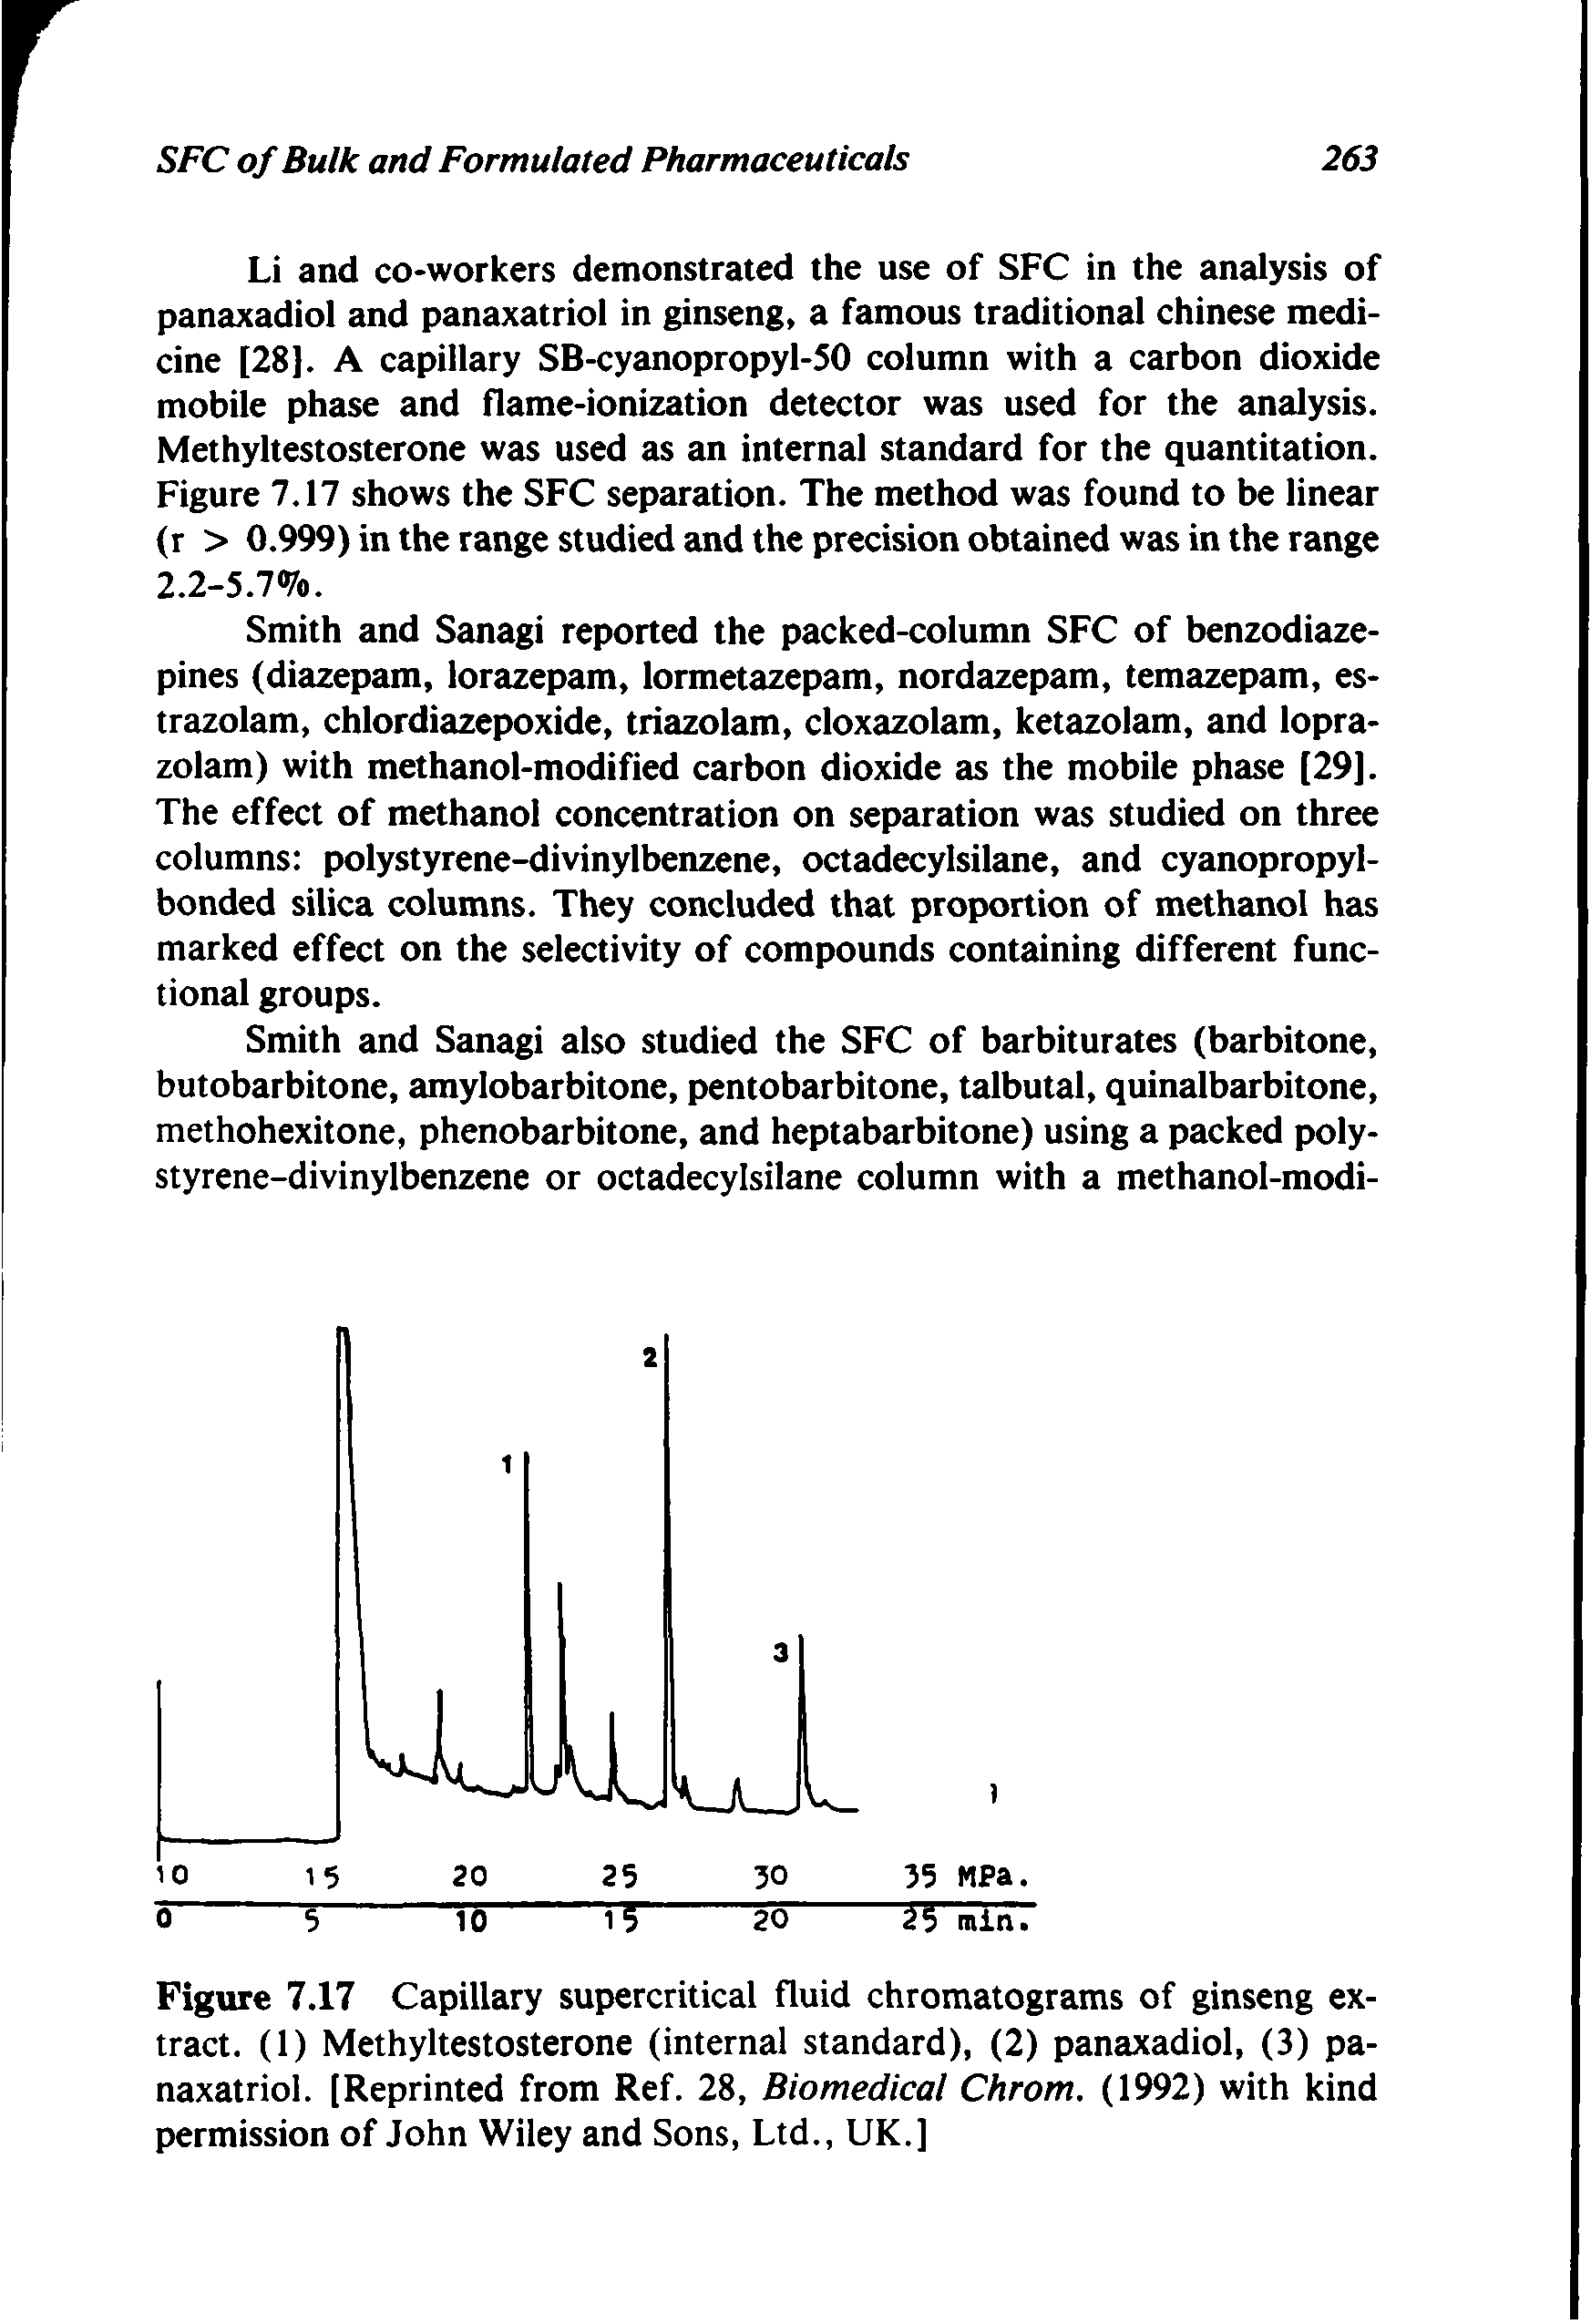 Figure 7.17 Capillary supercritical fluid chromatograms of ginseng extract. (1) Methyltestosterone (internal standard), (2) panaxadiol, (3) panaxatriol. [Reprinted from Ref. 28, Biomedical Chrom. (1992) with kind permission of John Wiley and Sons, Ltd., UK.]...